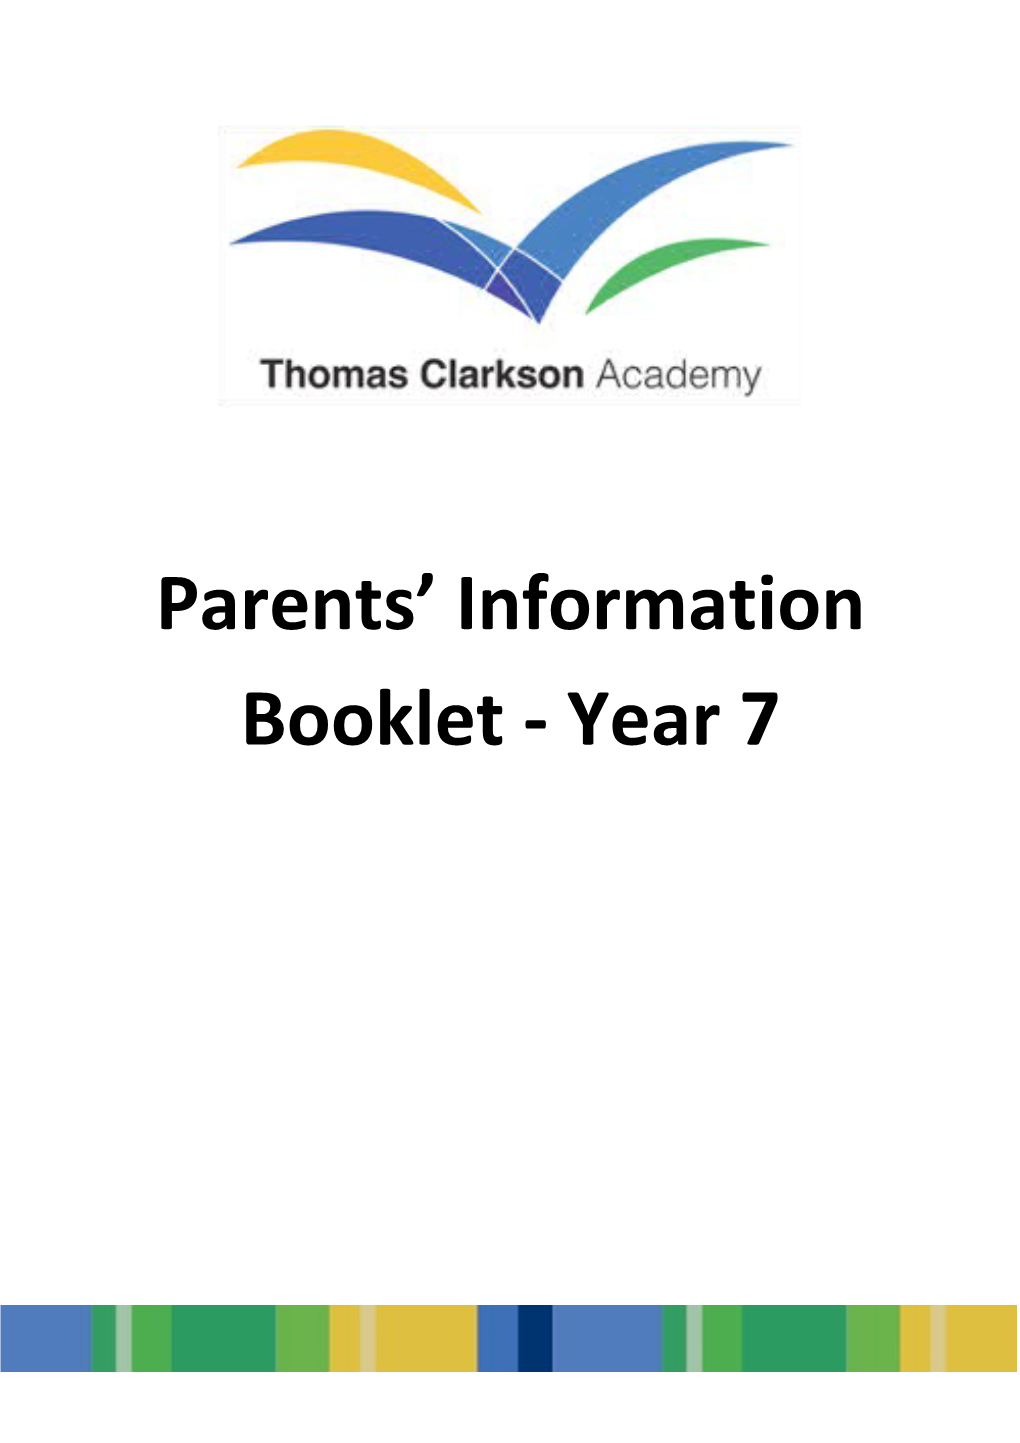 Parents Information Booklet - Year 7